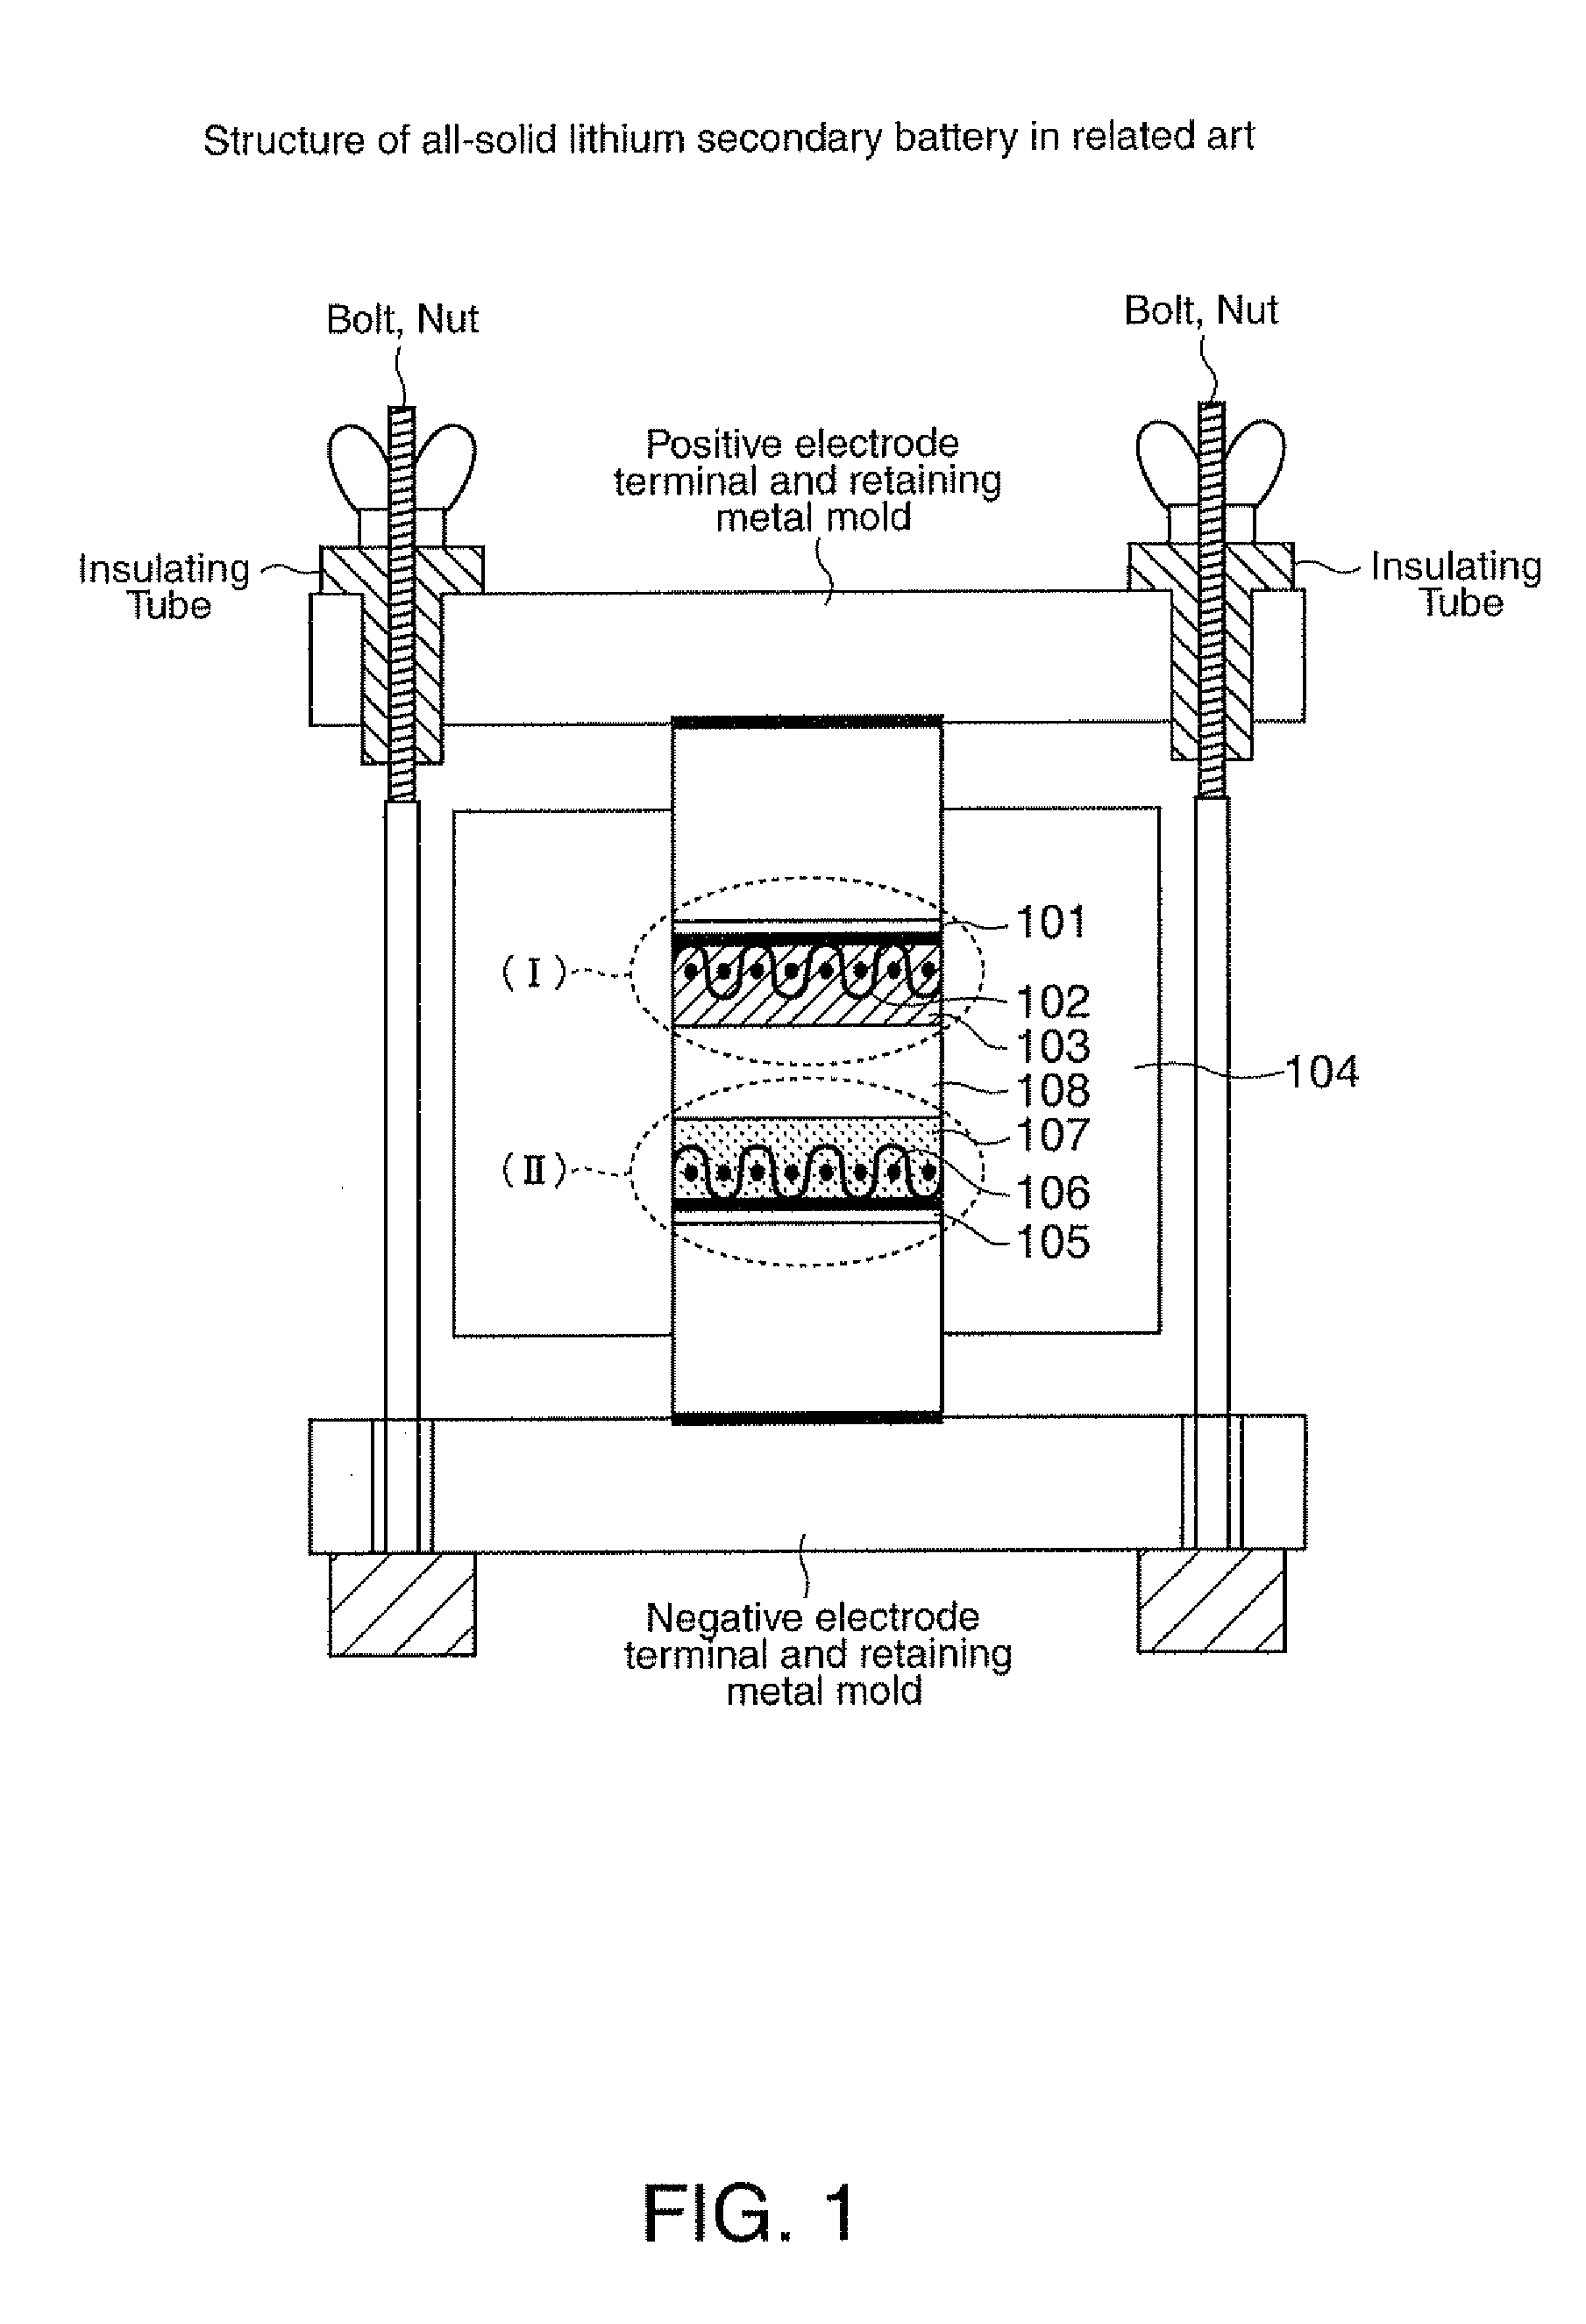 Sulfide-based lithium-ion-conducting solid electrolyte glass, all-solid lithium secondary battery, and method for manufacturing all-solid lithium secondary battery